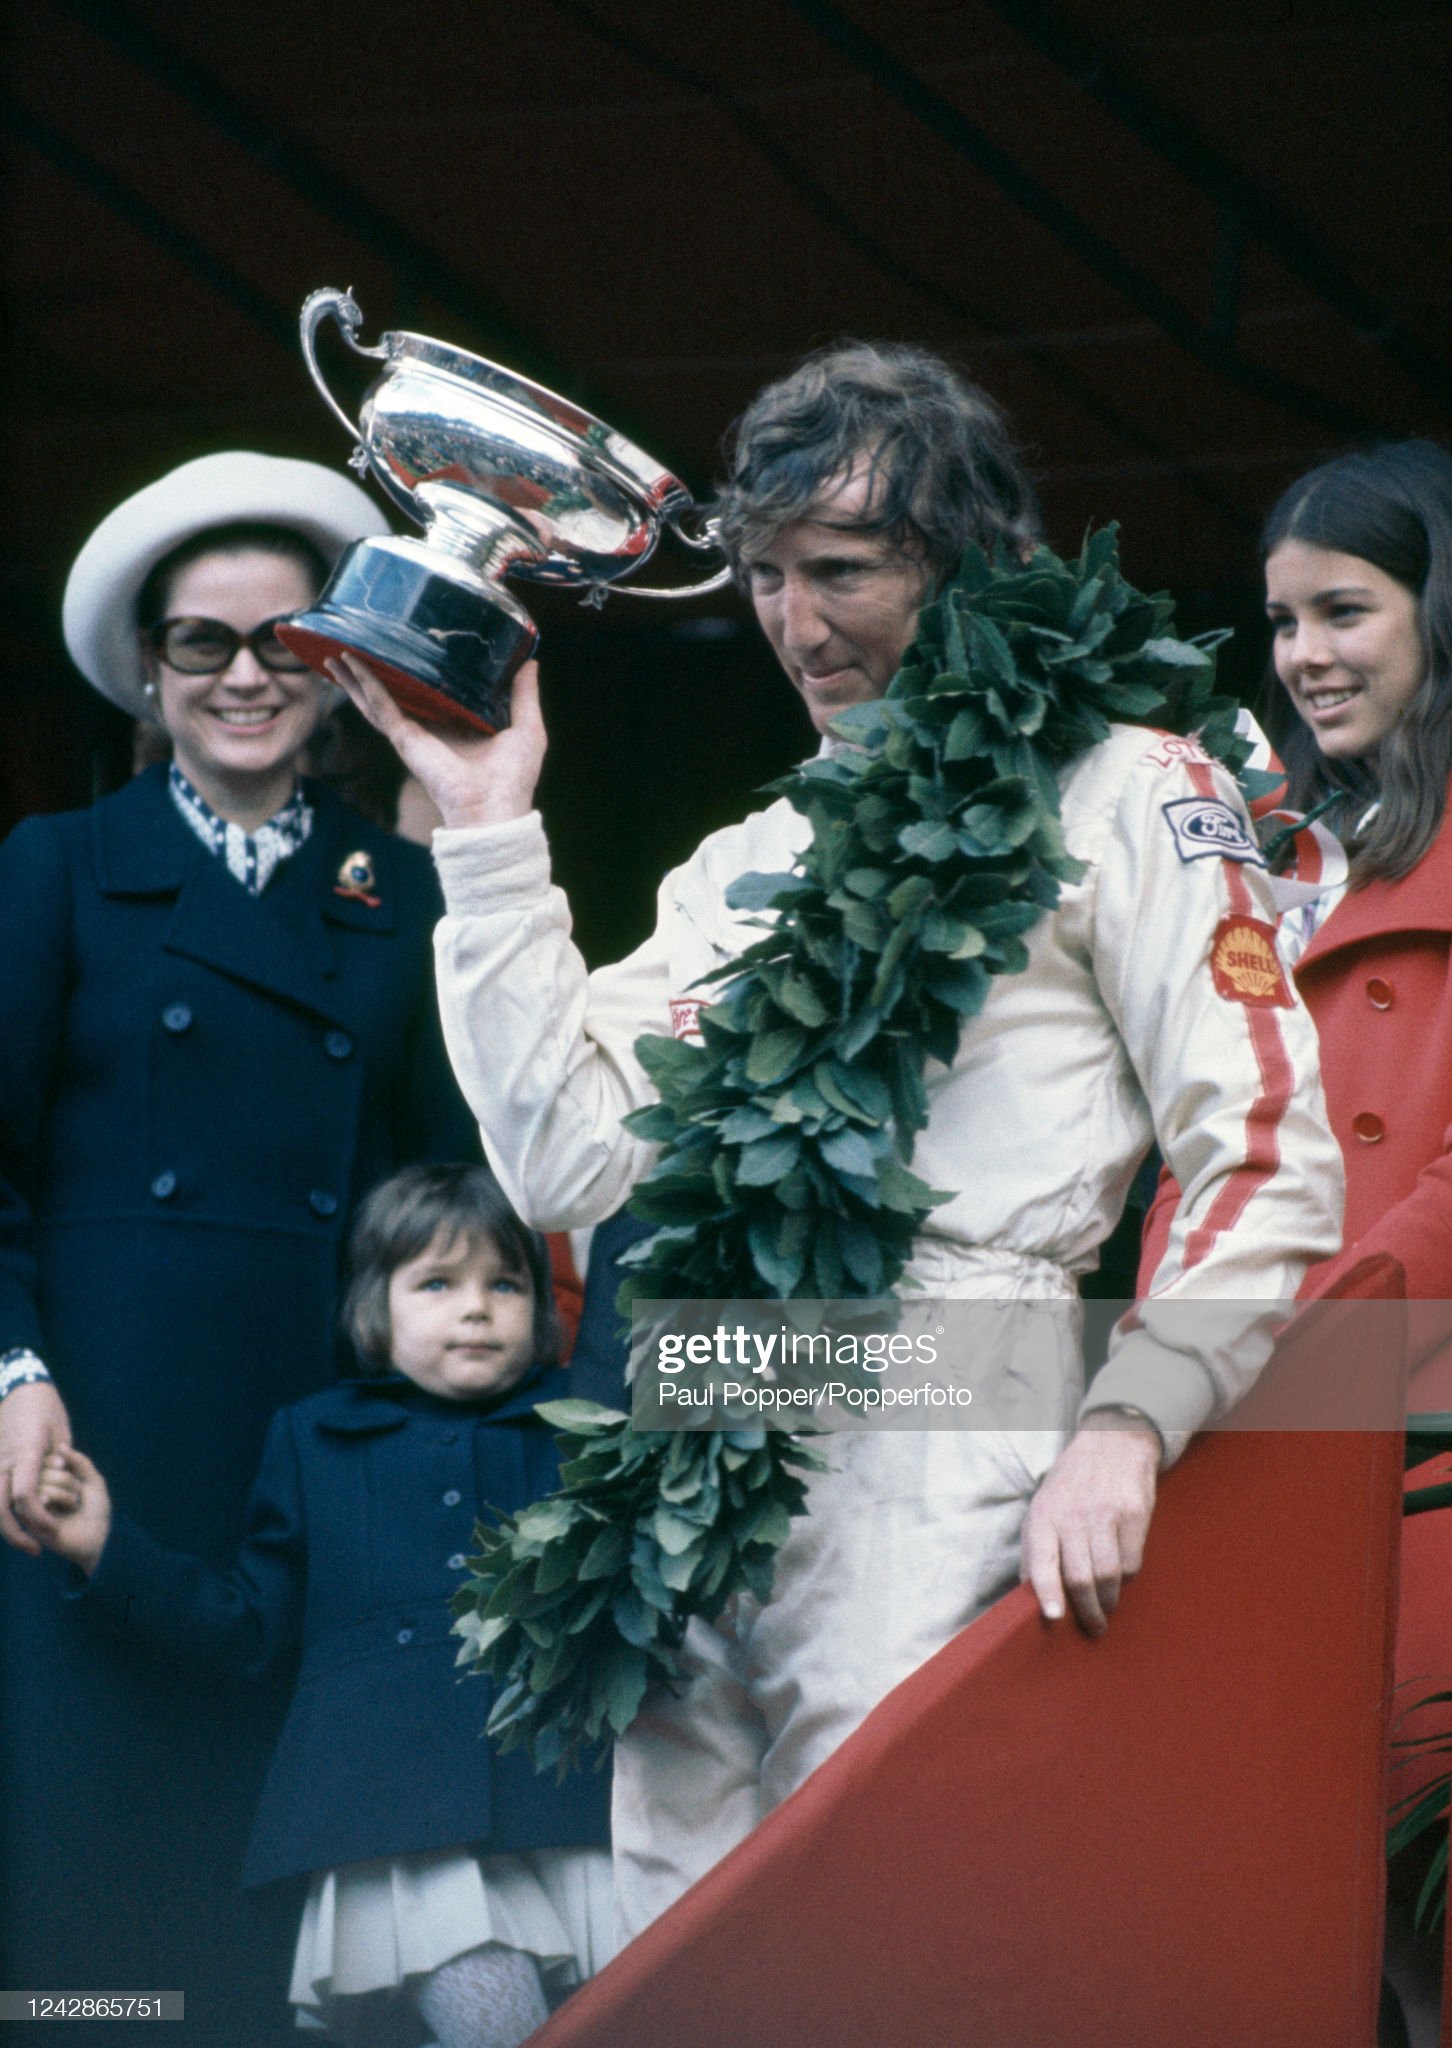 Jochen Rindt, representing Lotus-Ford, celebrates with the trophy after winning the Monaco Grand Prix at the Circuit du Monaco on May 10, 1970 in Monte Carlo, Monaco.